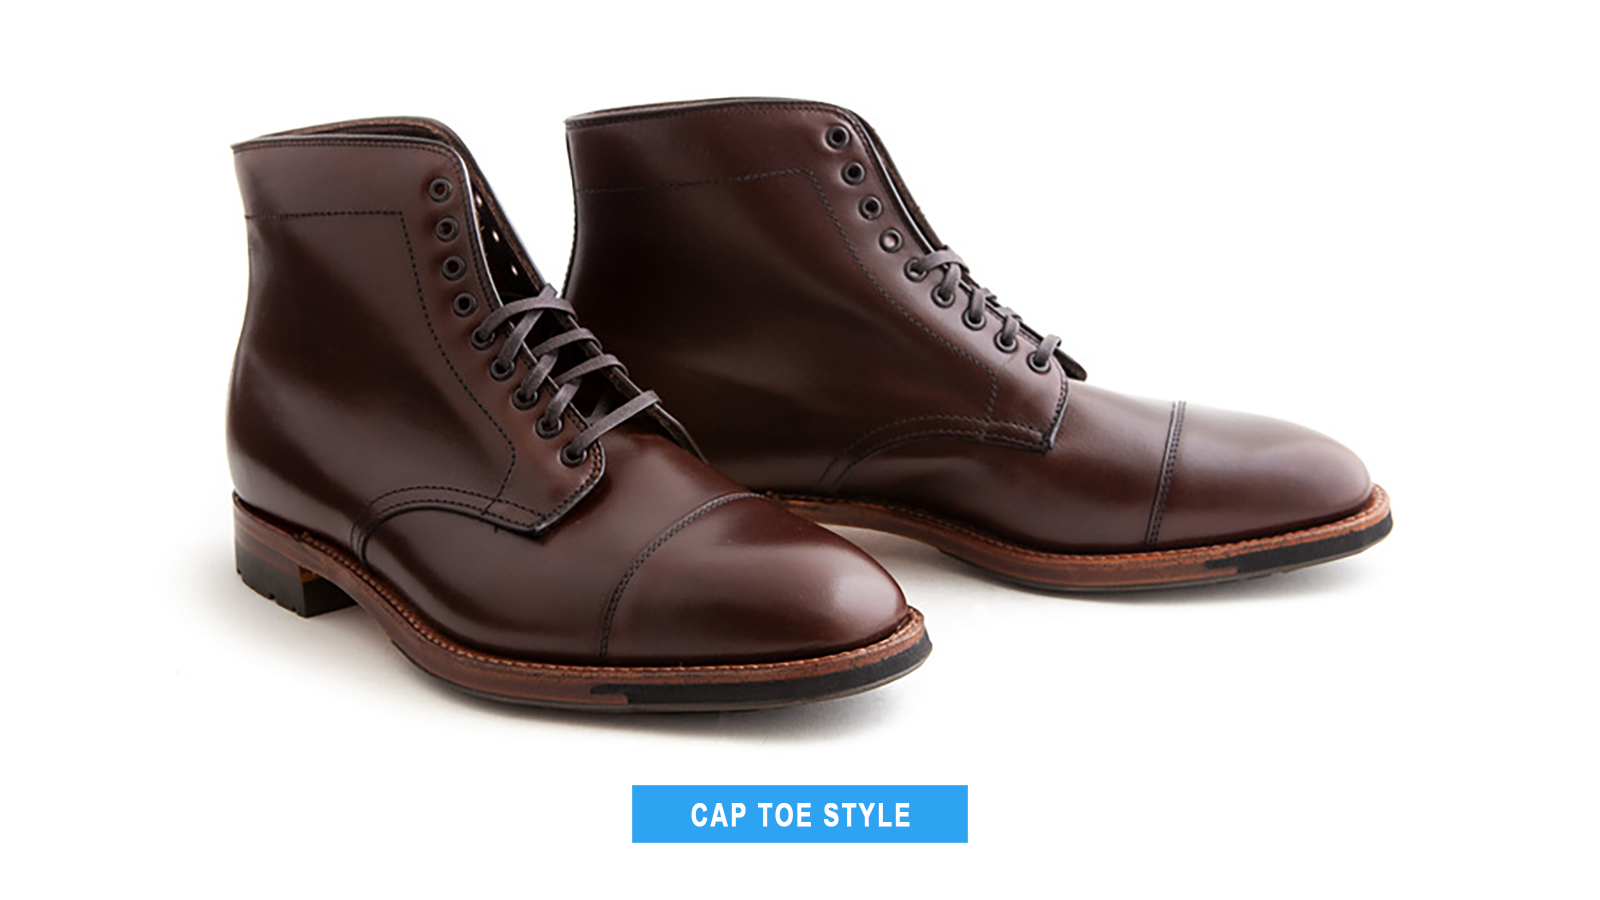 cap toe boots style